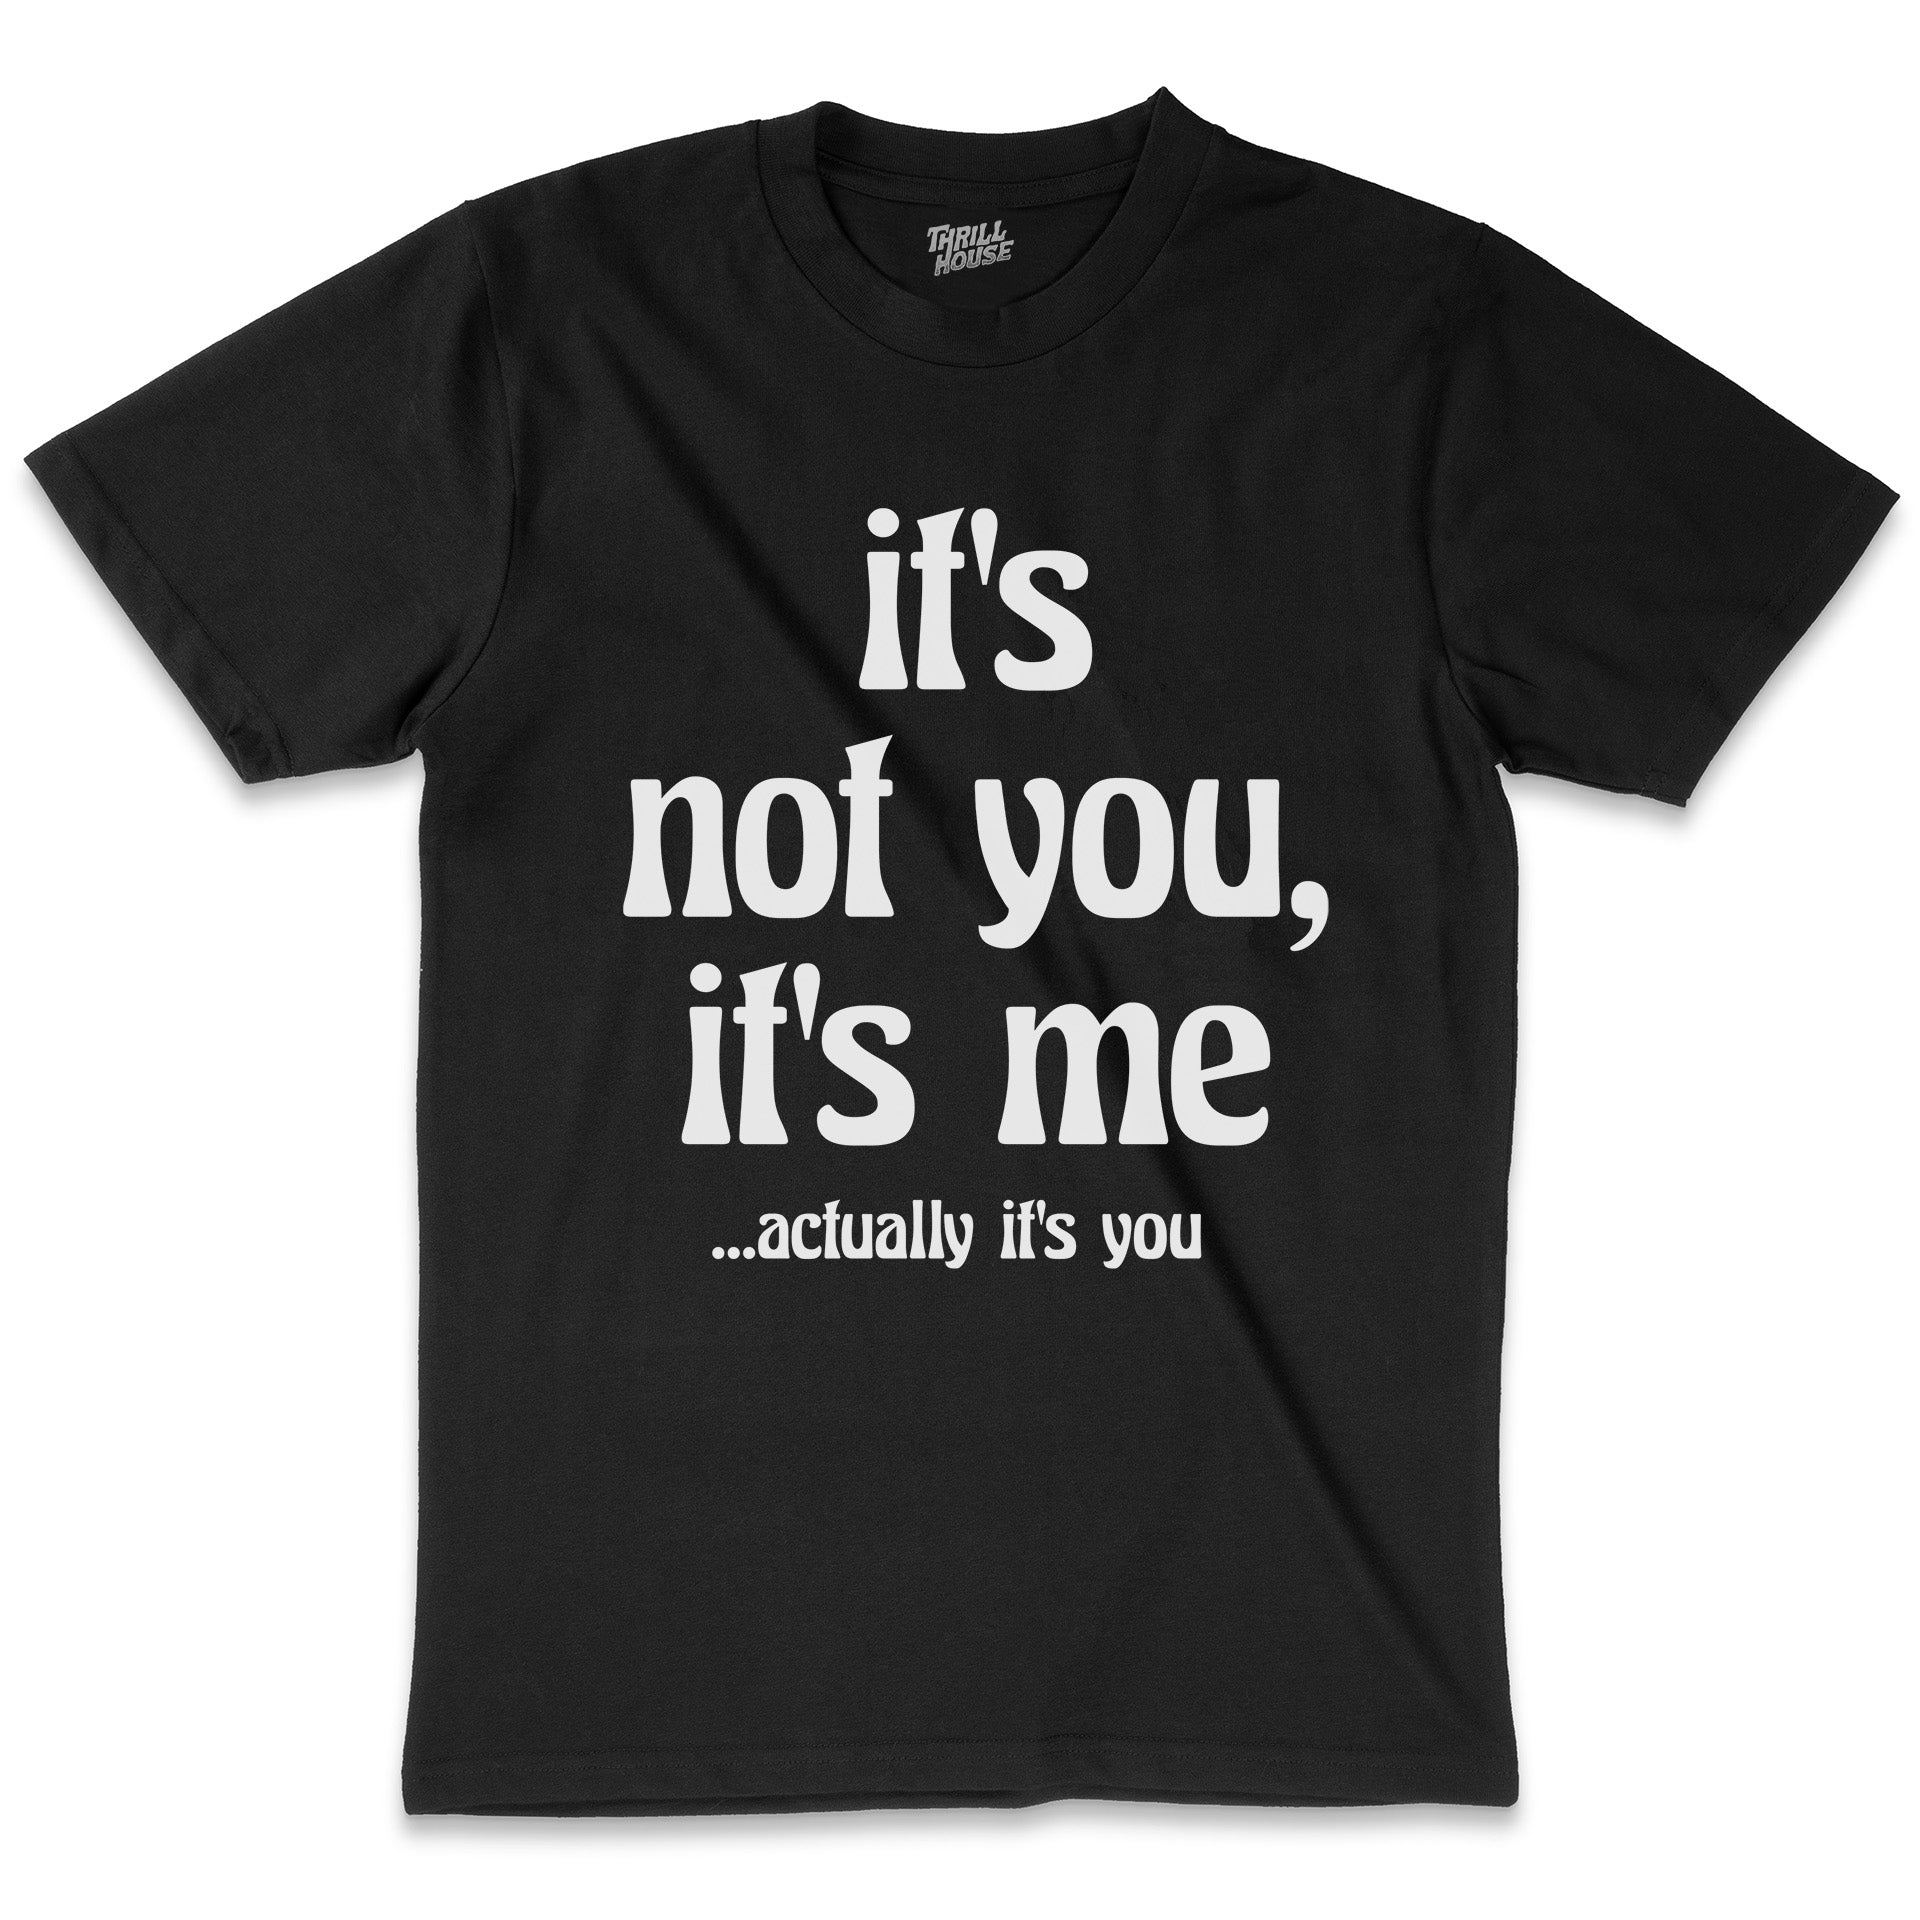 It's Not You, It's Me Funny Slogan Relationships Saying Humorous Cotton T-Shirt